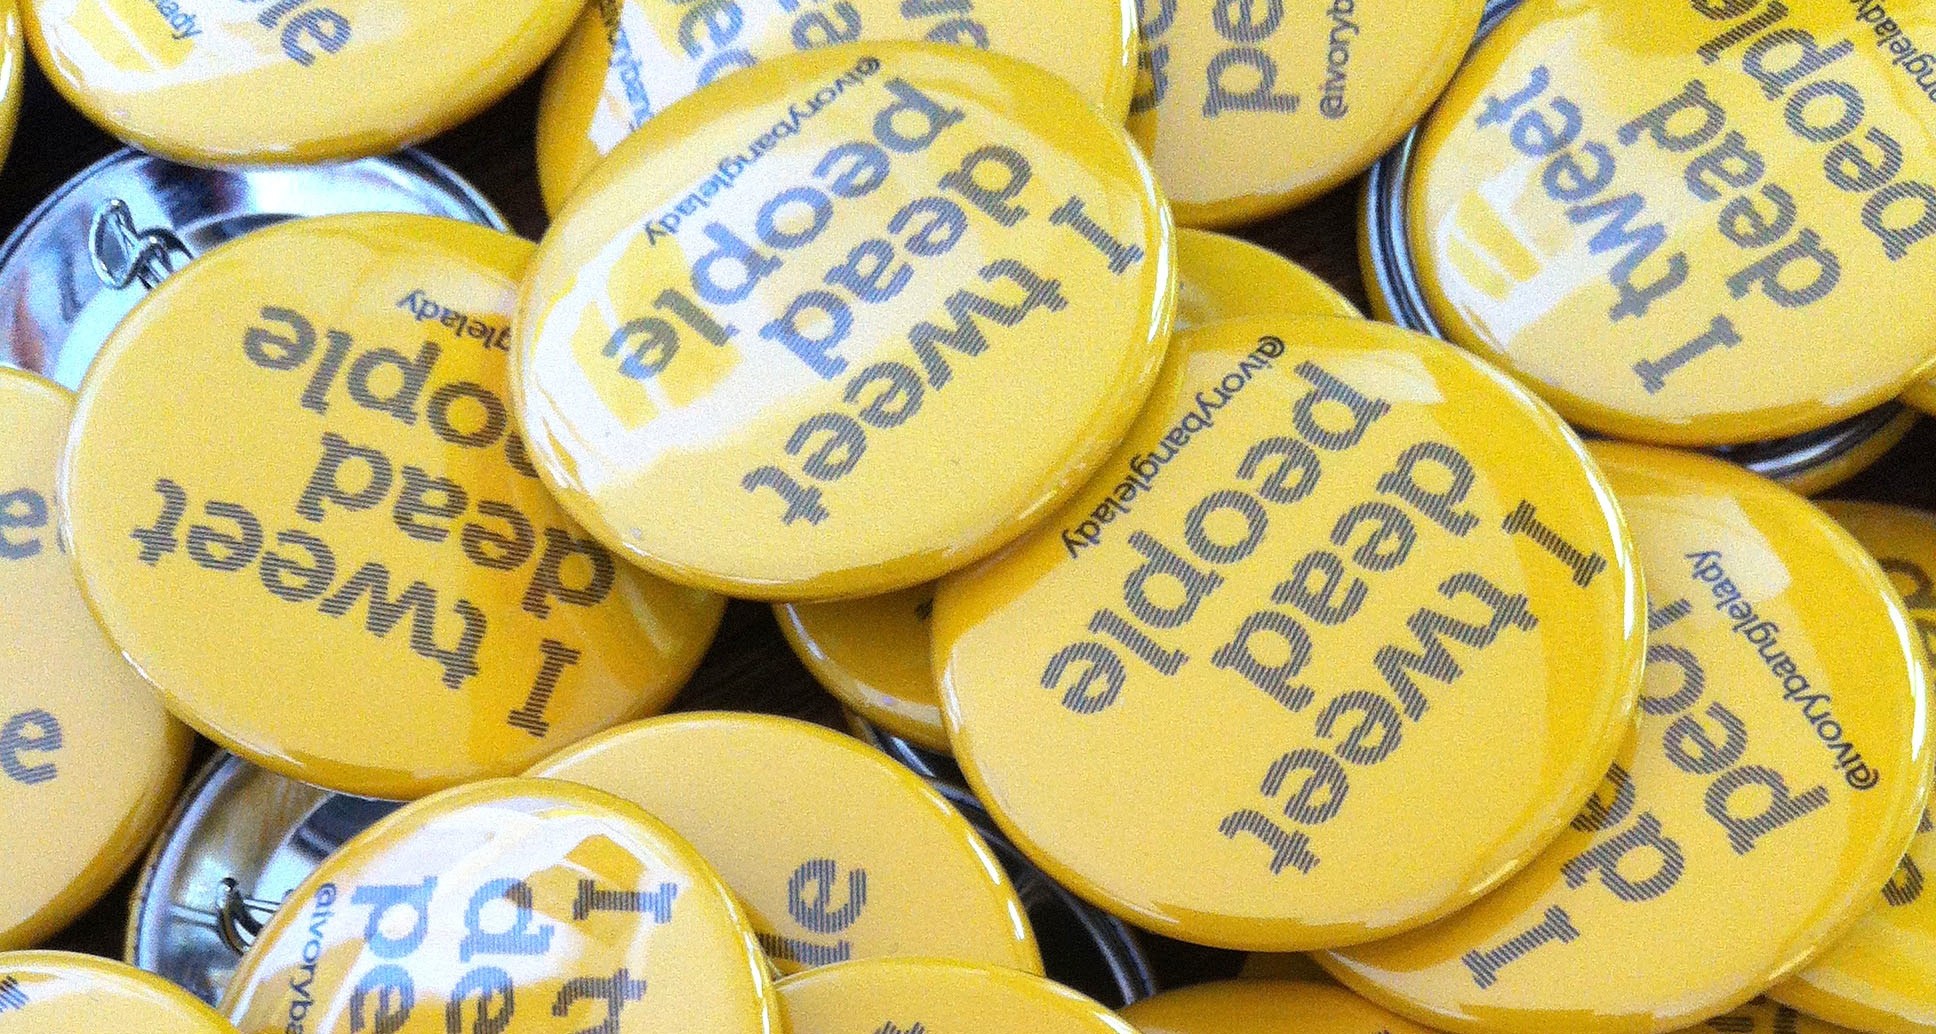 I Tweet Dead People, Merchandise Badges from 'The Ivory Bangle Lady Project'